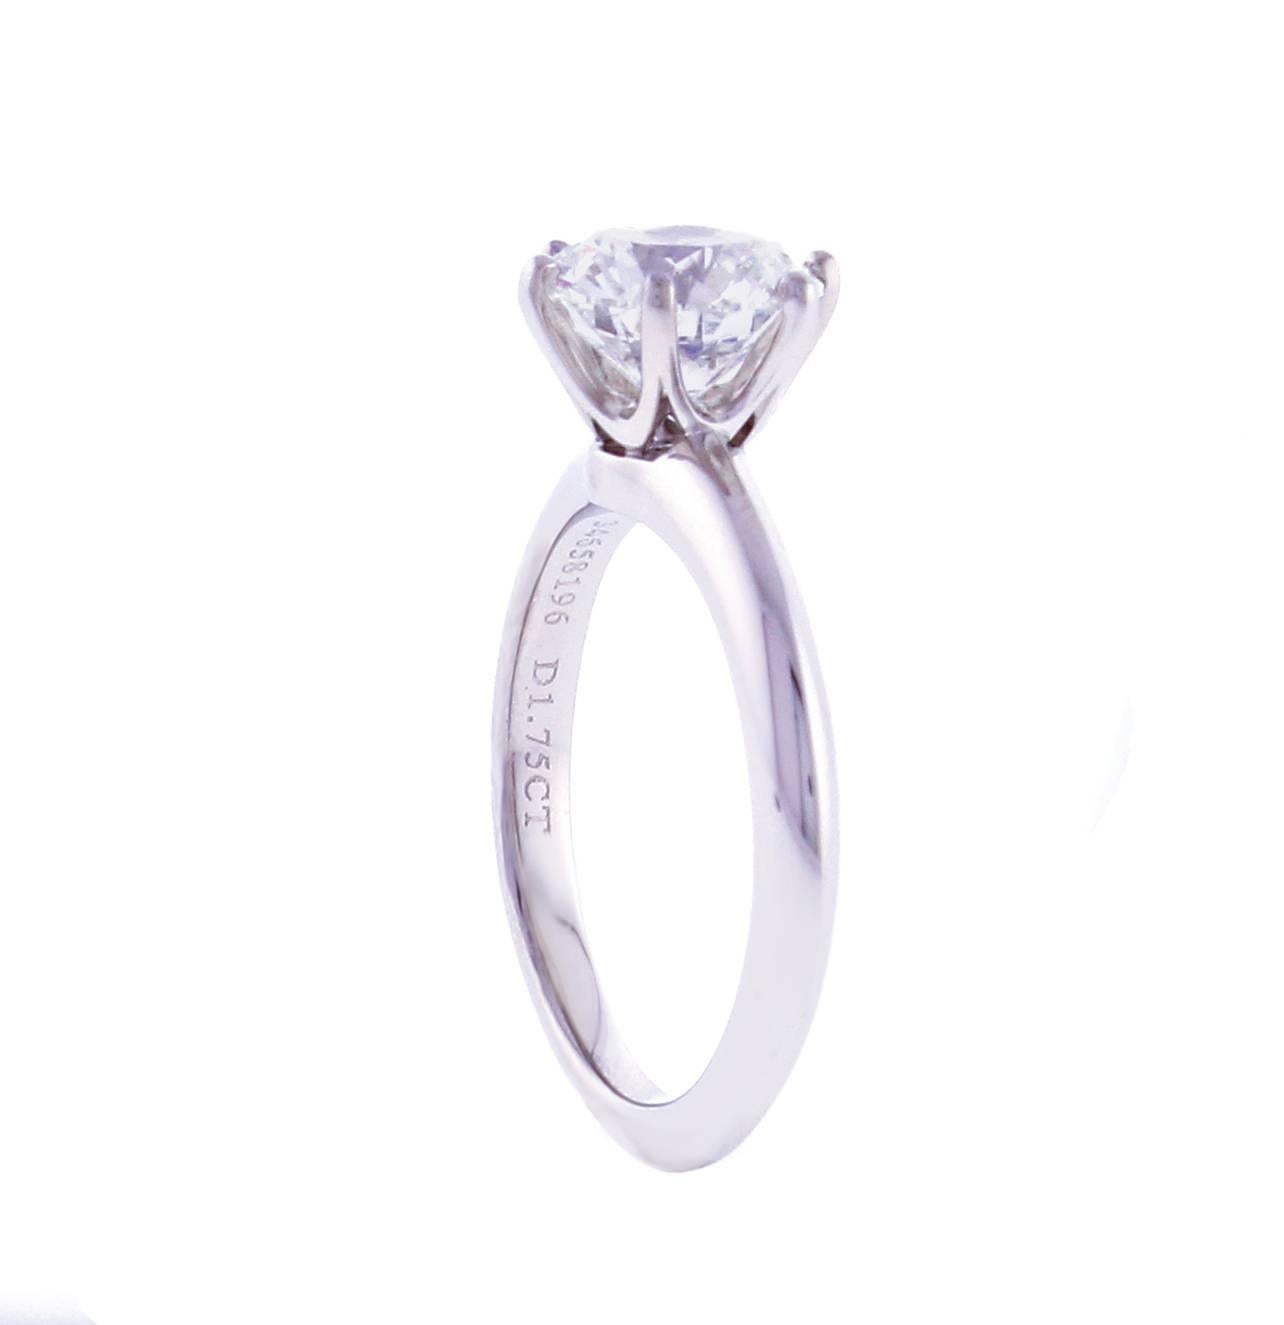 From Tiffany & Co., this brilliant diamond engagement ring. The ring features a 1.75 carat Tiffany diamond. The diamond is H color and VVS2 and is set in the classic Tiffany platinum setting. The ring is accompanied by a Tiffany appraisal and